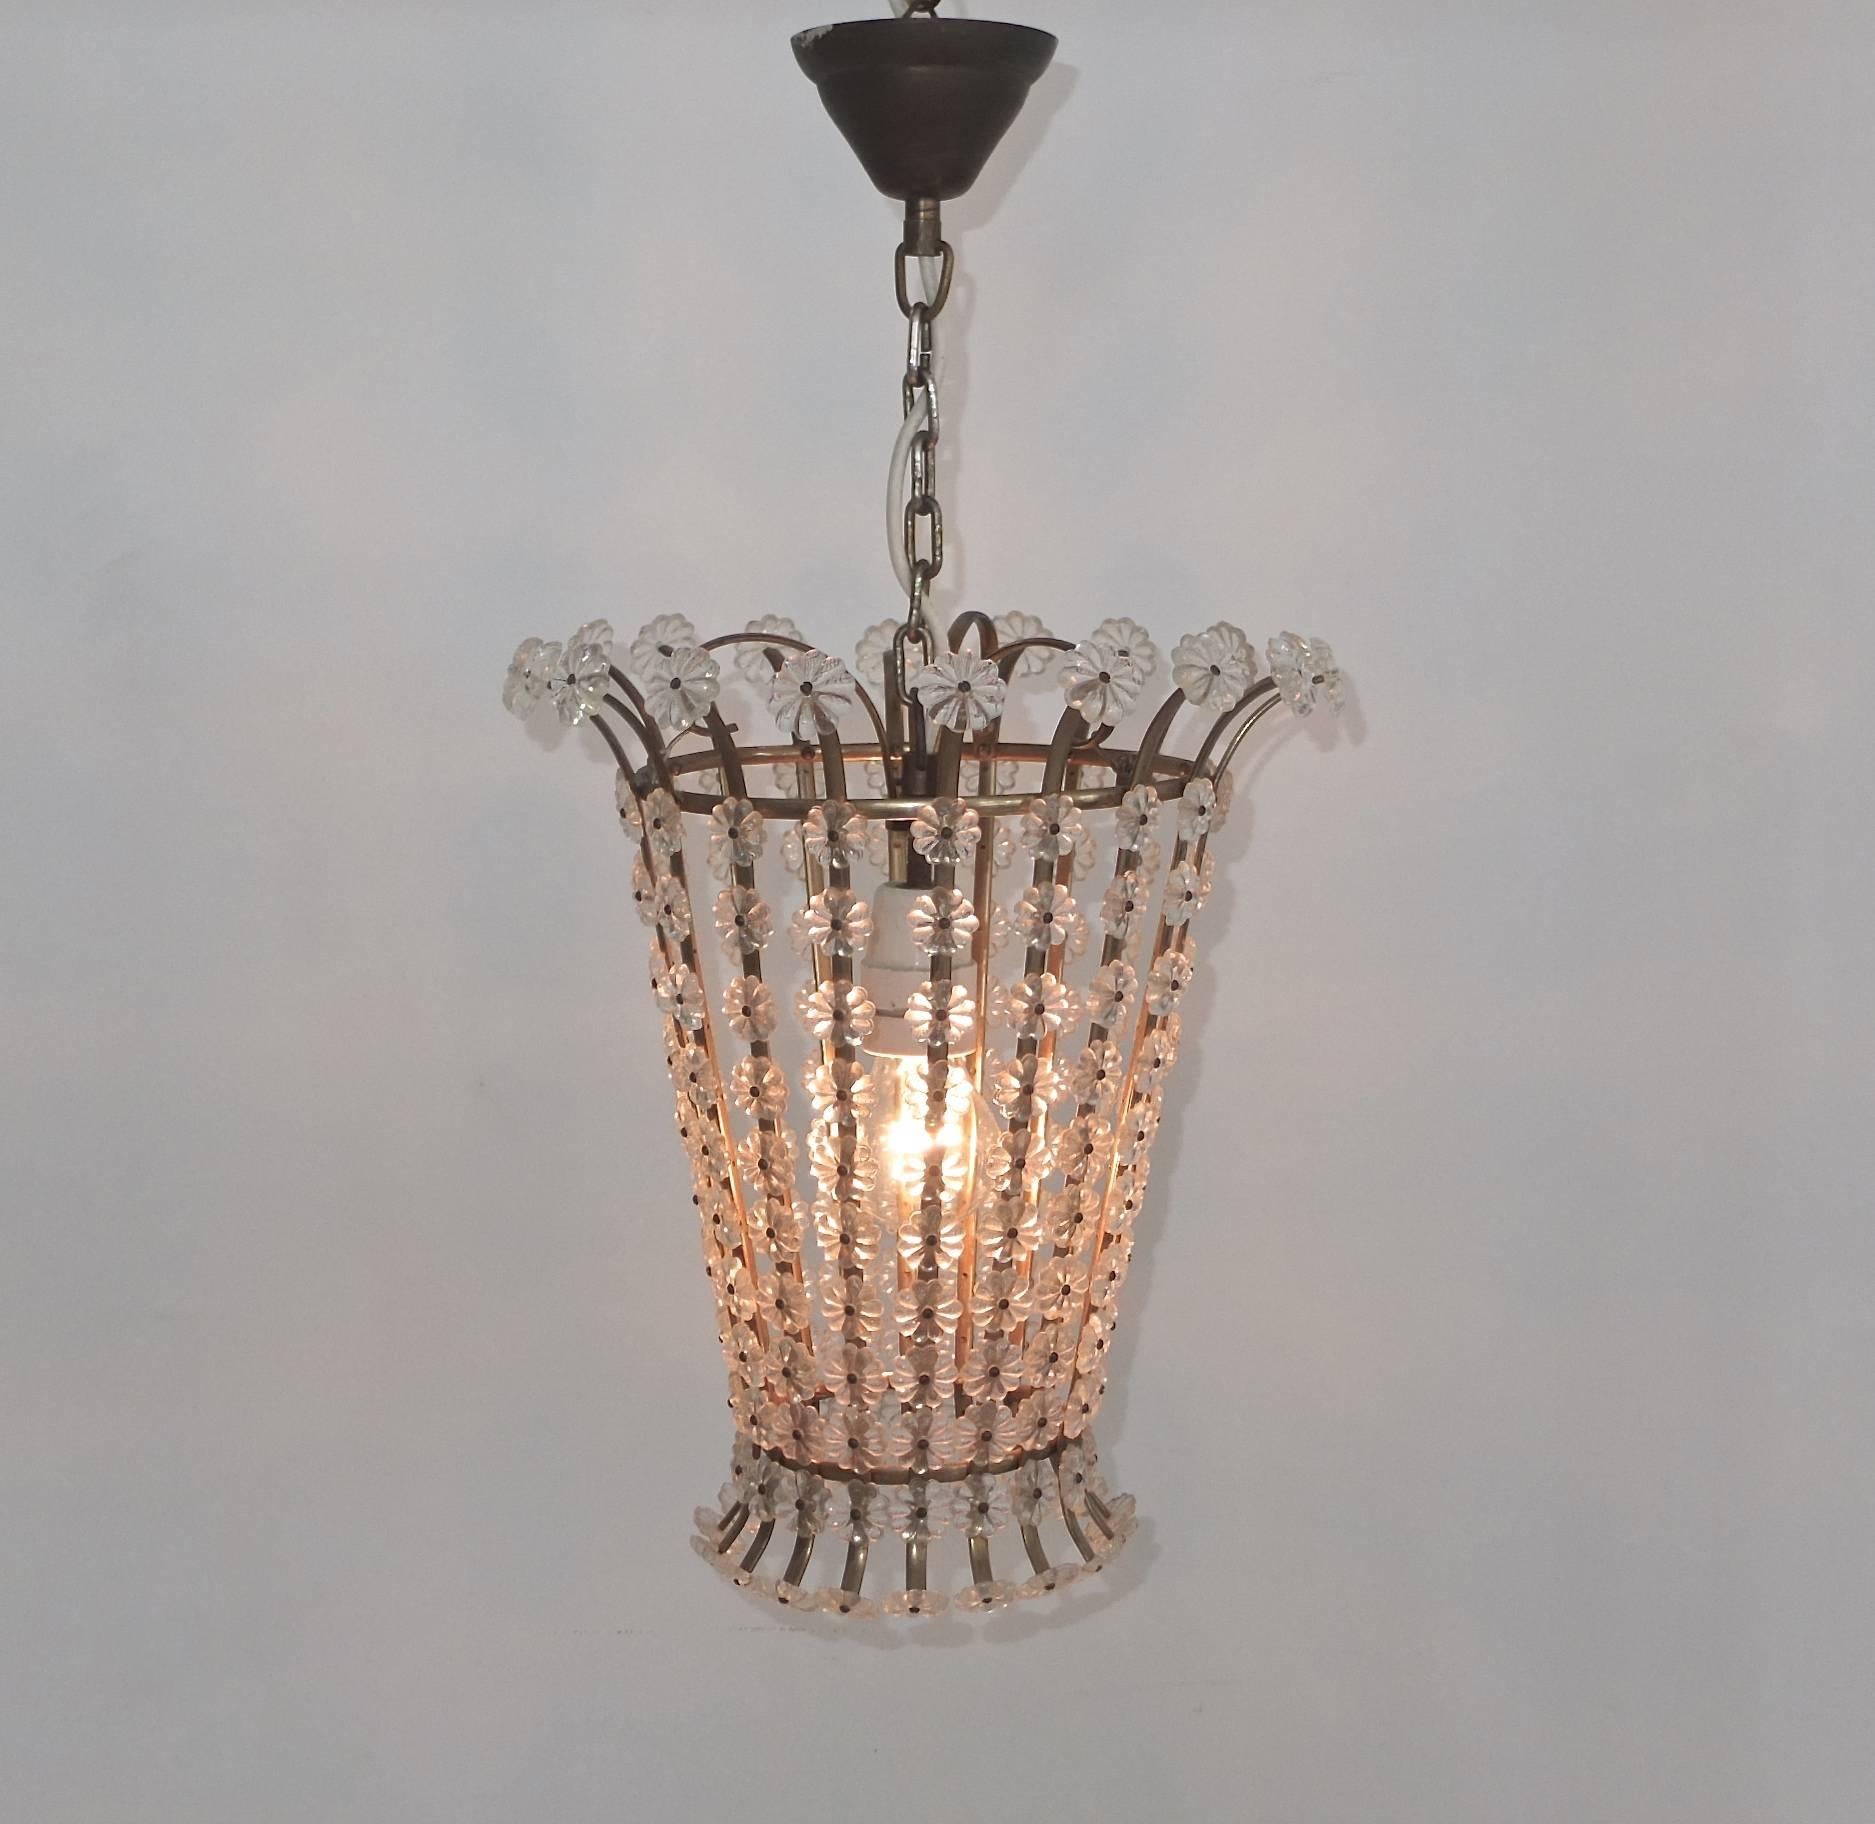 A 1950s lantern pendant from Sweden in tapered round cage form, constructed from brass hoops and straps, onto which is screwed a series acrylic crystal rosettes. A single bulb is inside the basket, standard size Edison screw up to 150 watts. Hangs